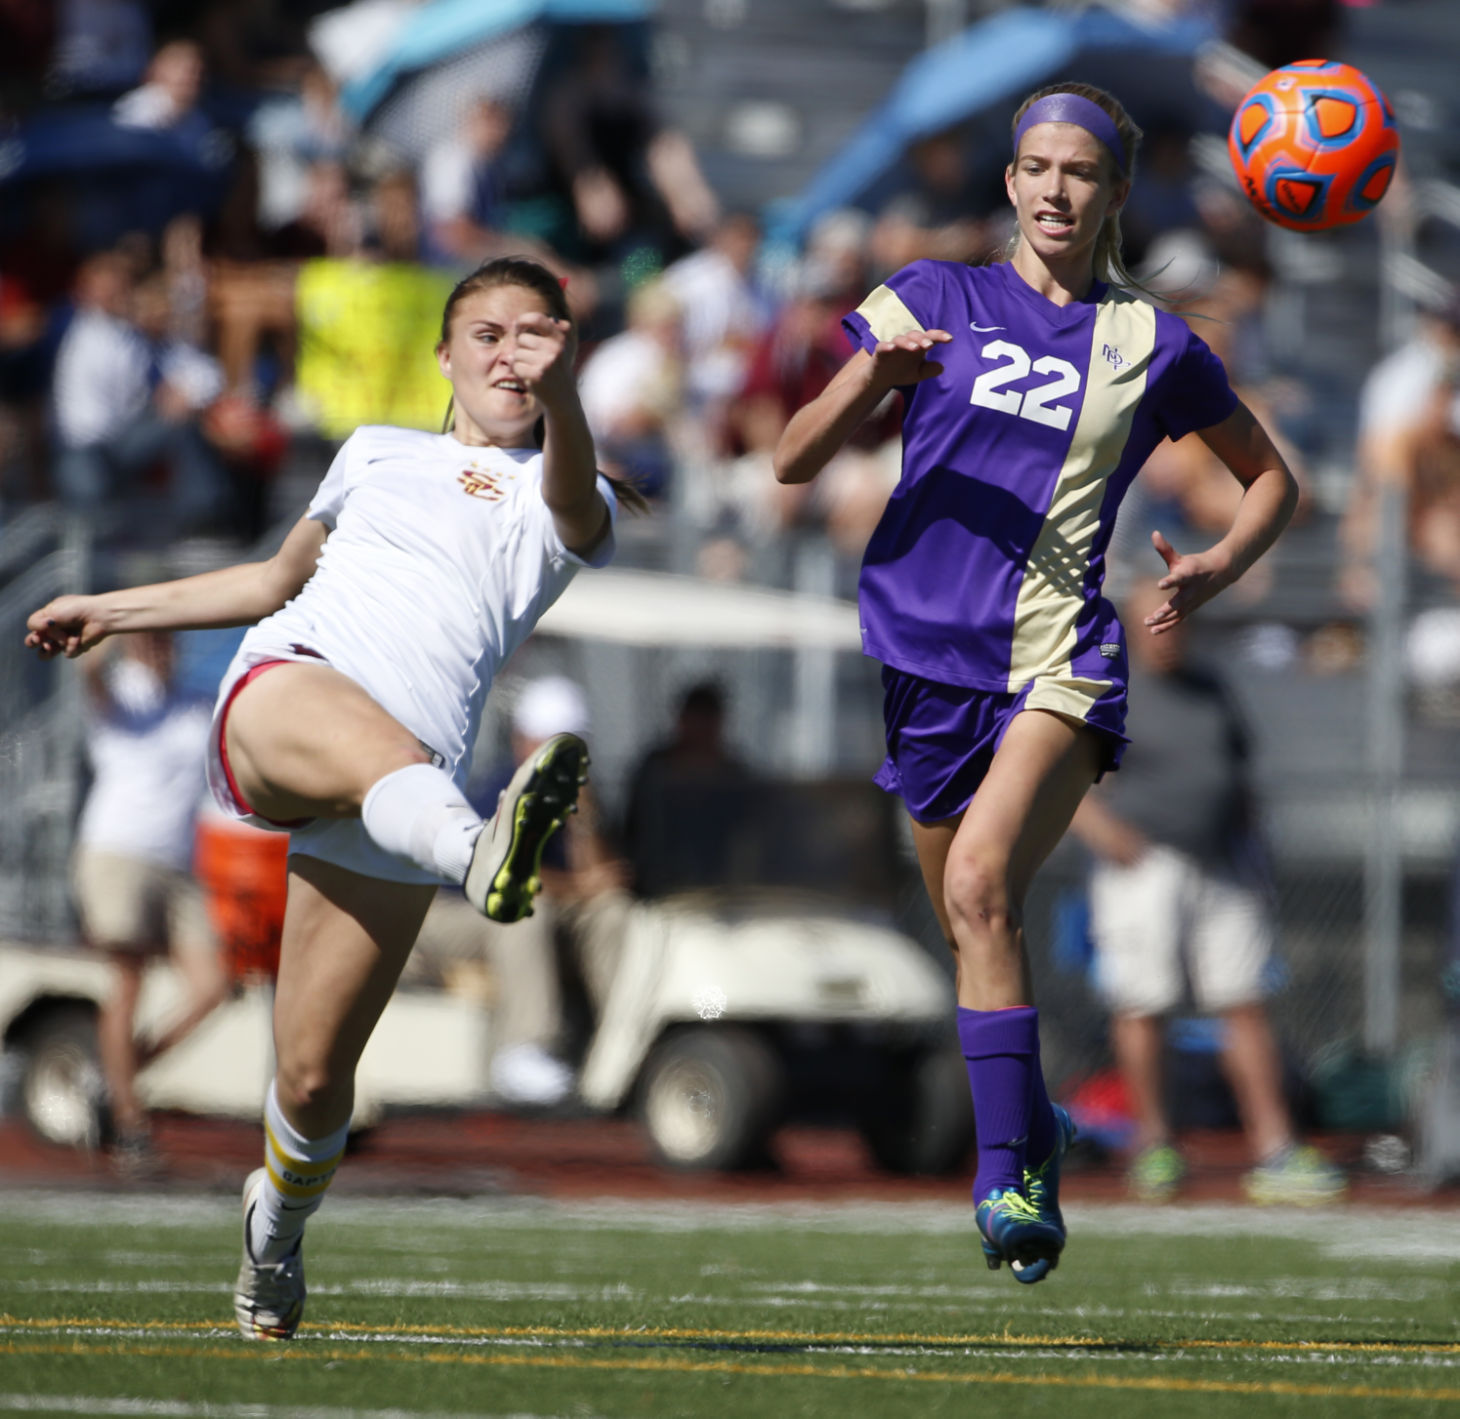 Salpointe falls just short of state soccer title